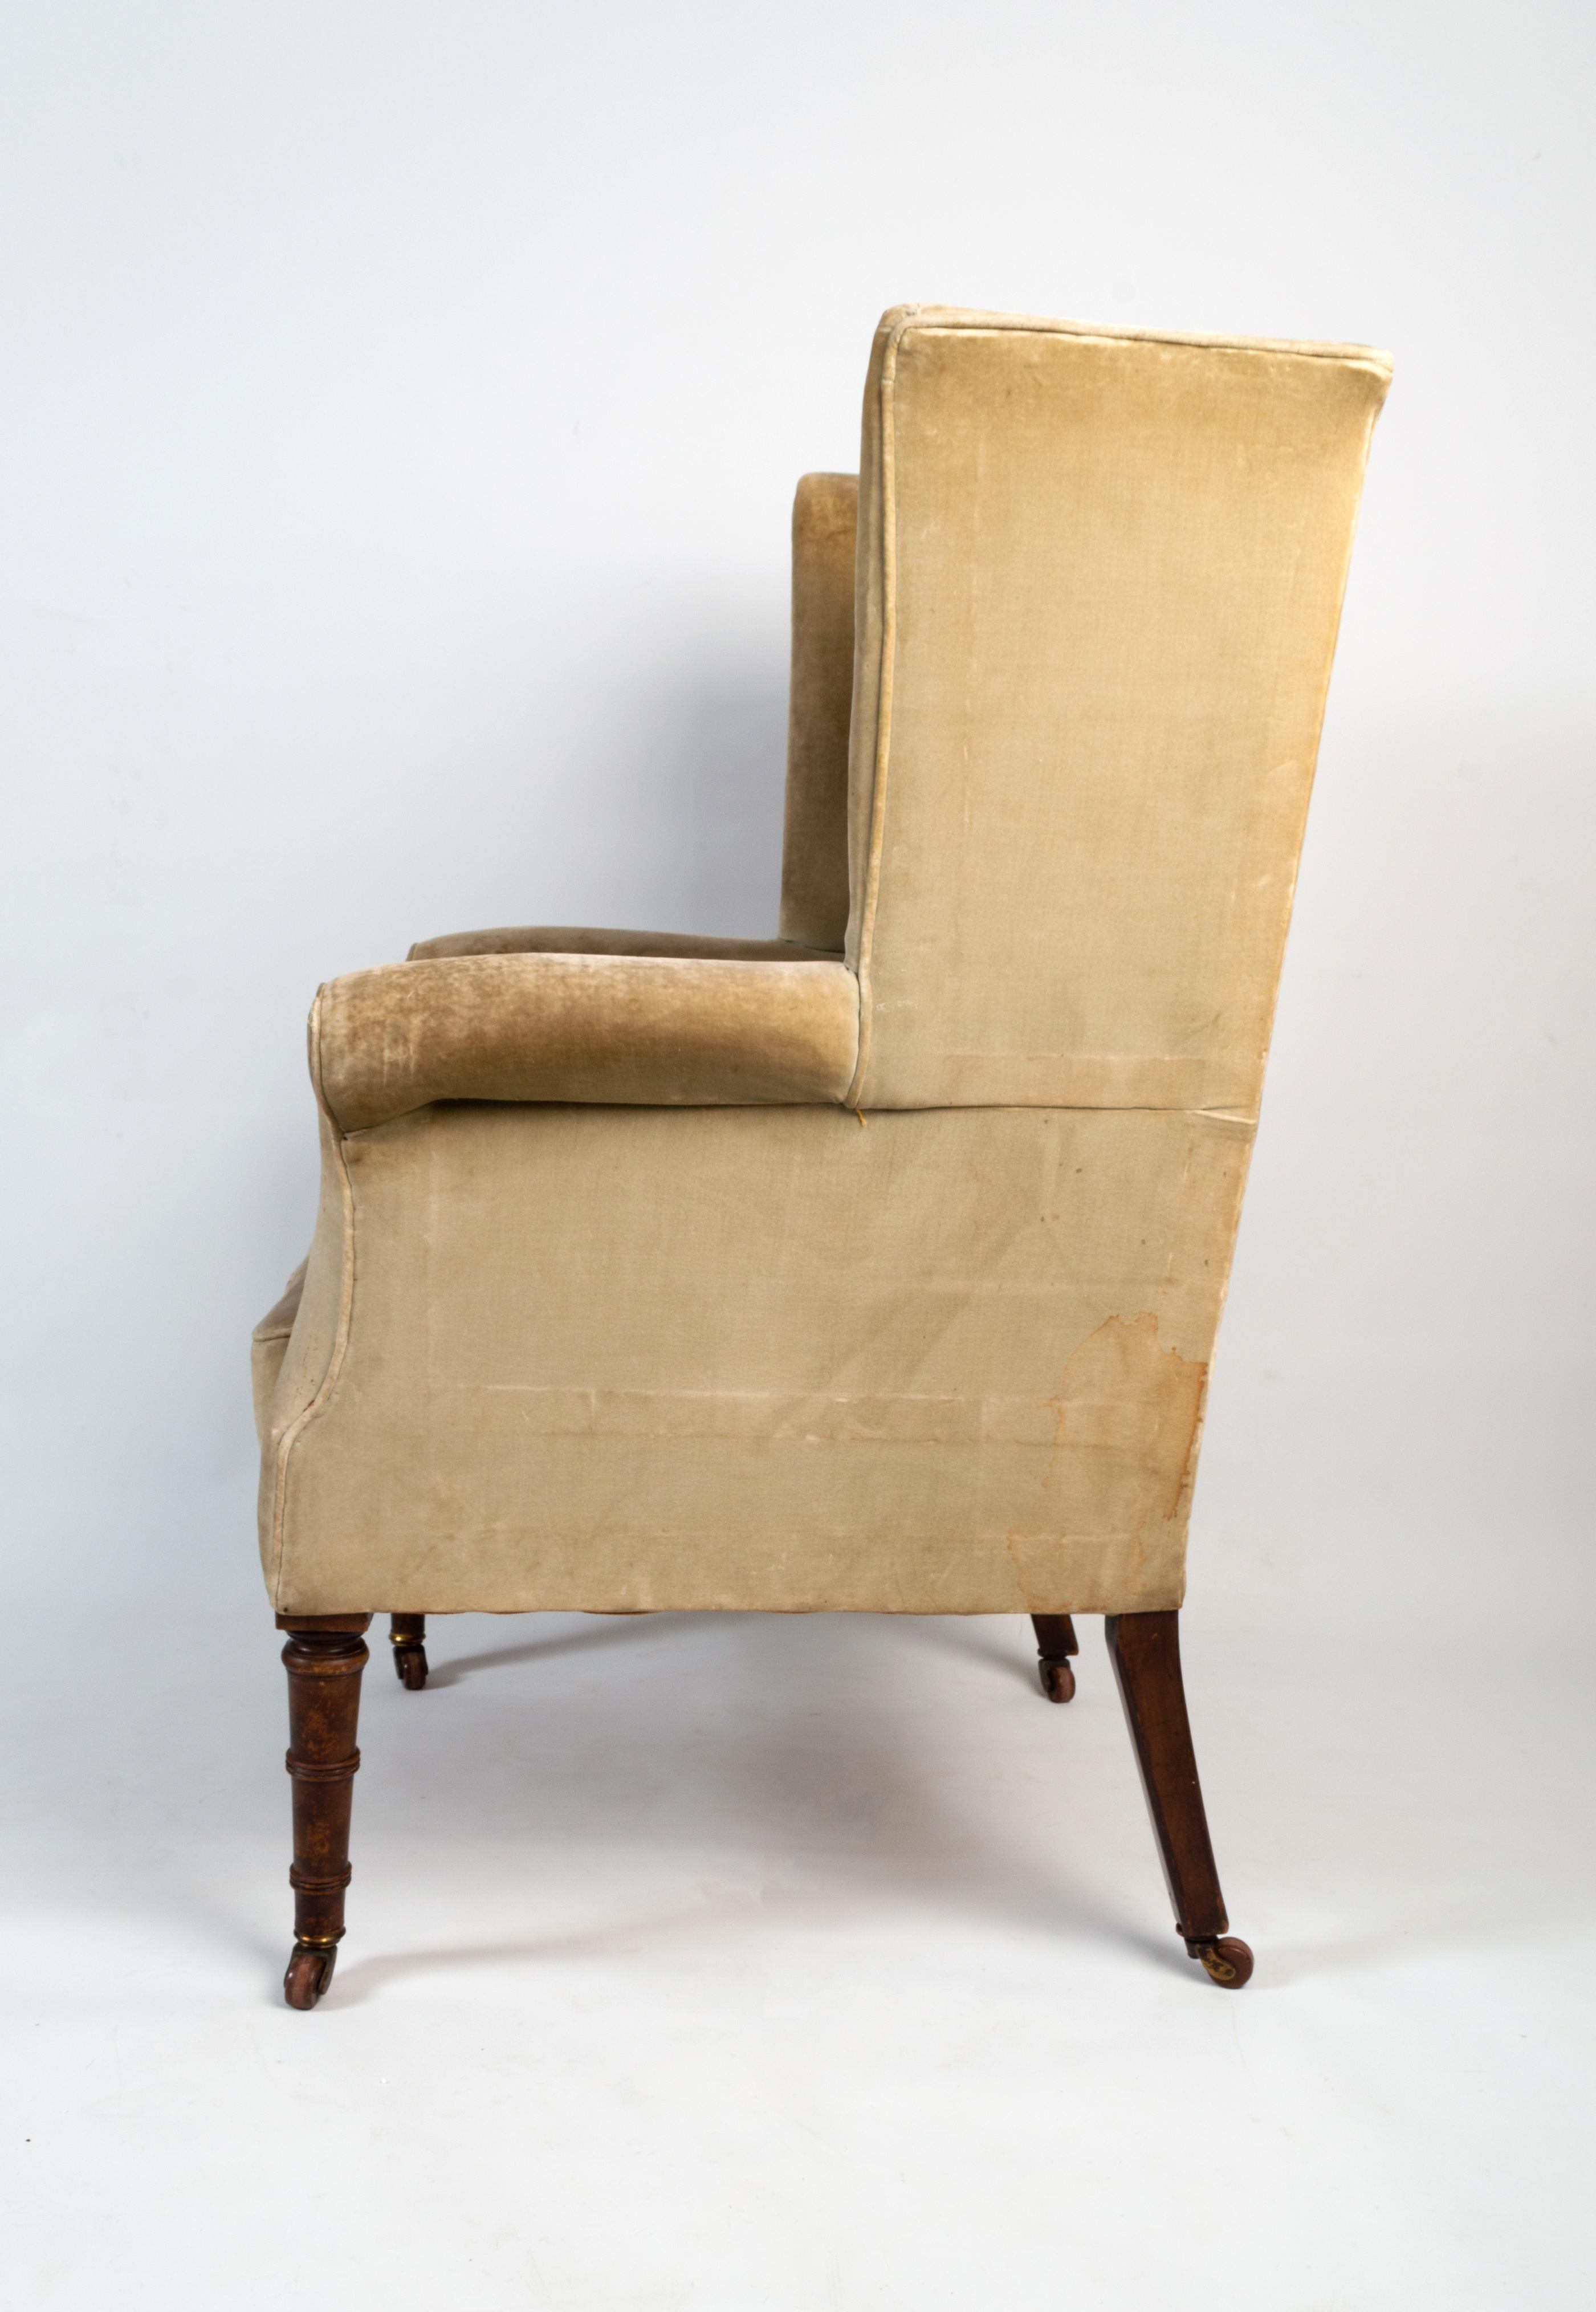 Upholstery Antique English Regency Wing Armchair, circa 1820 For Sale